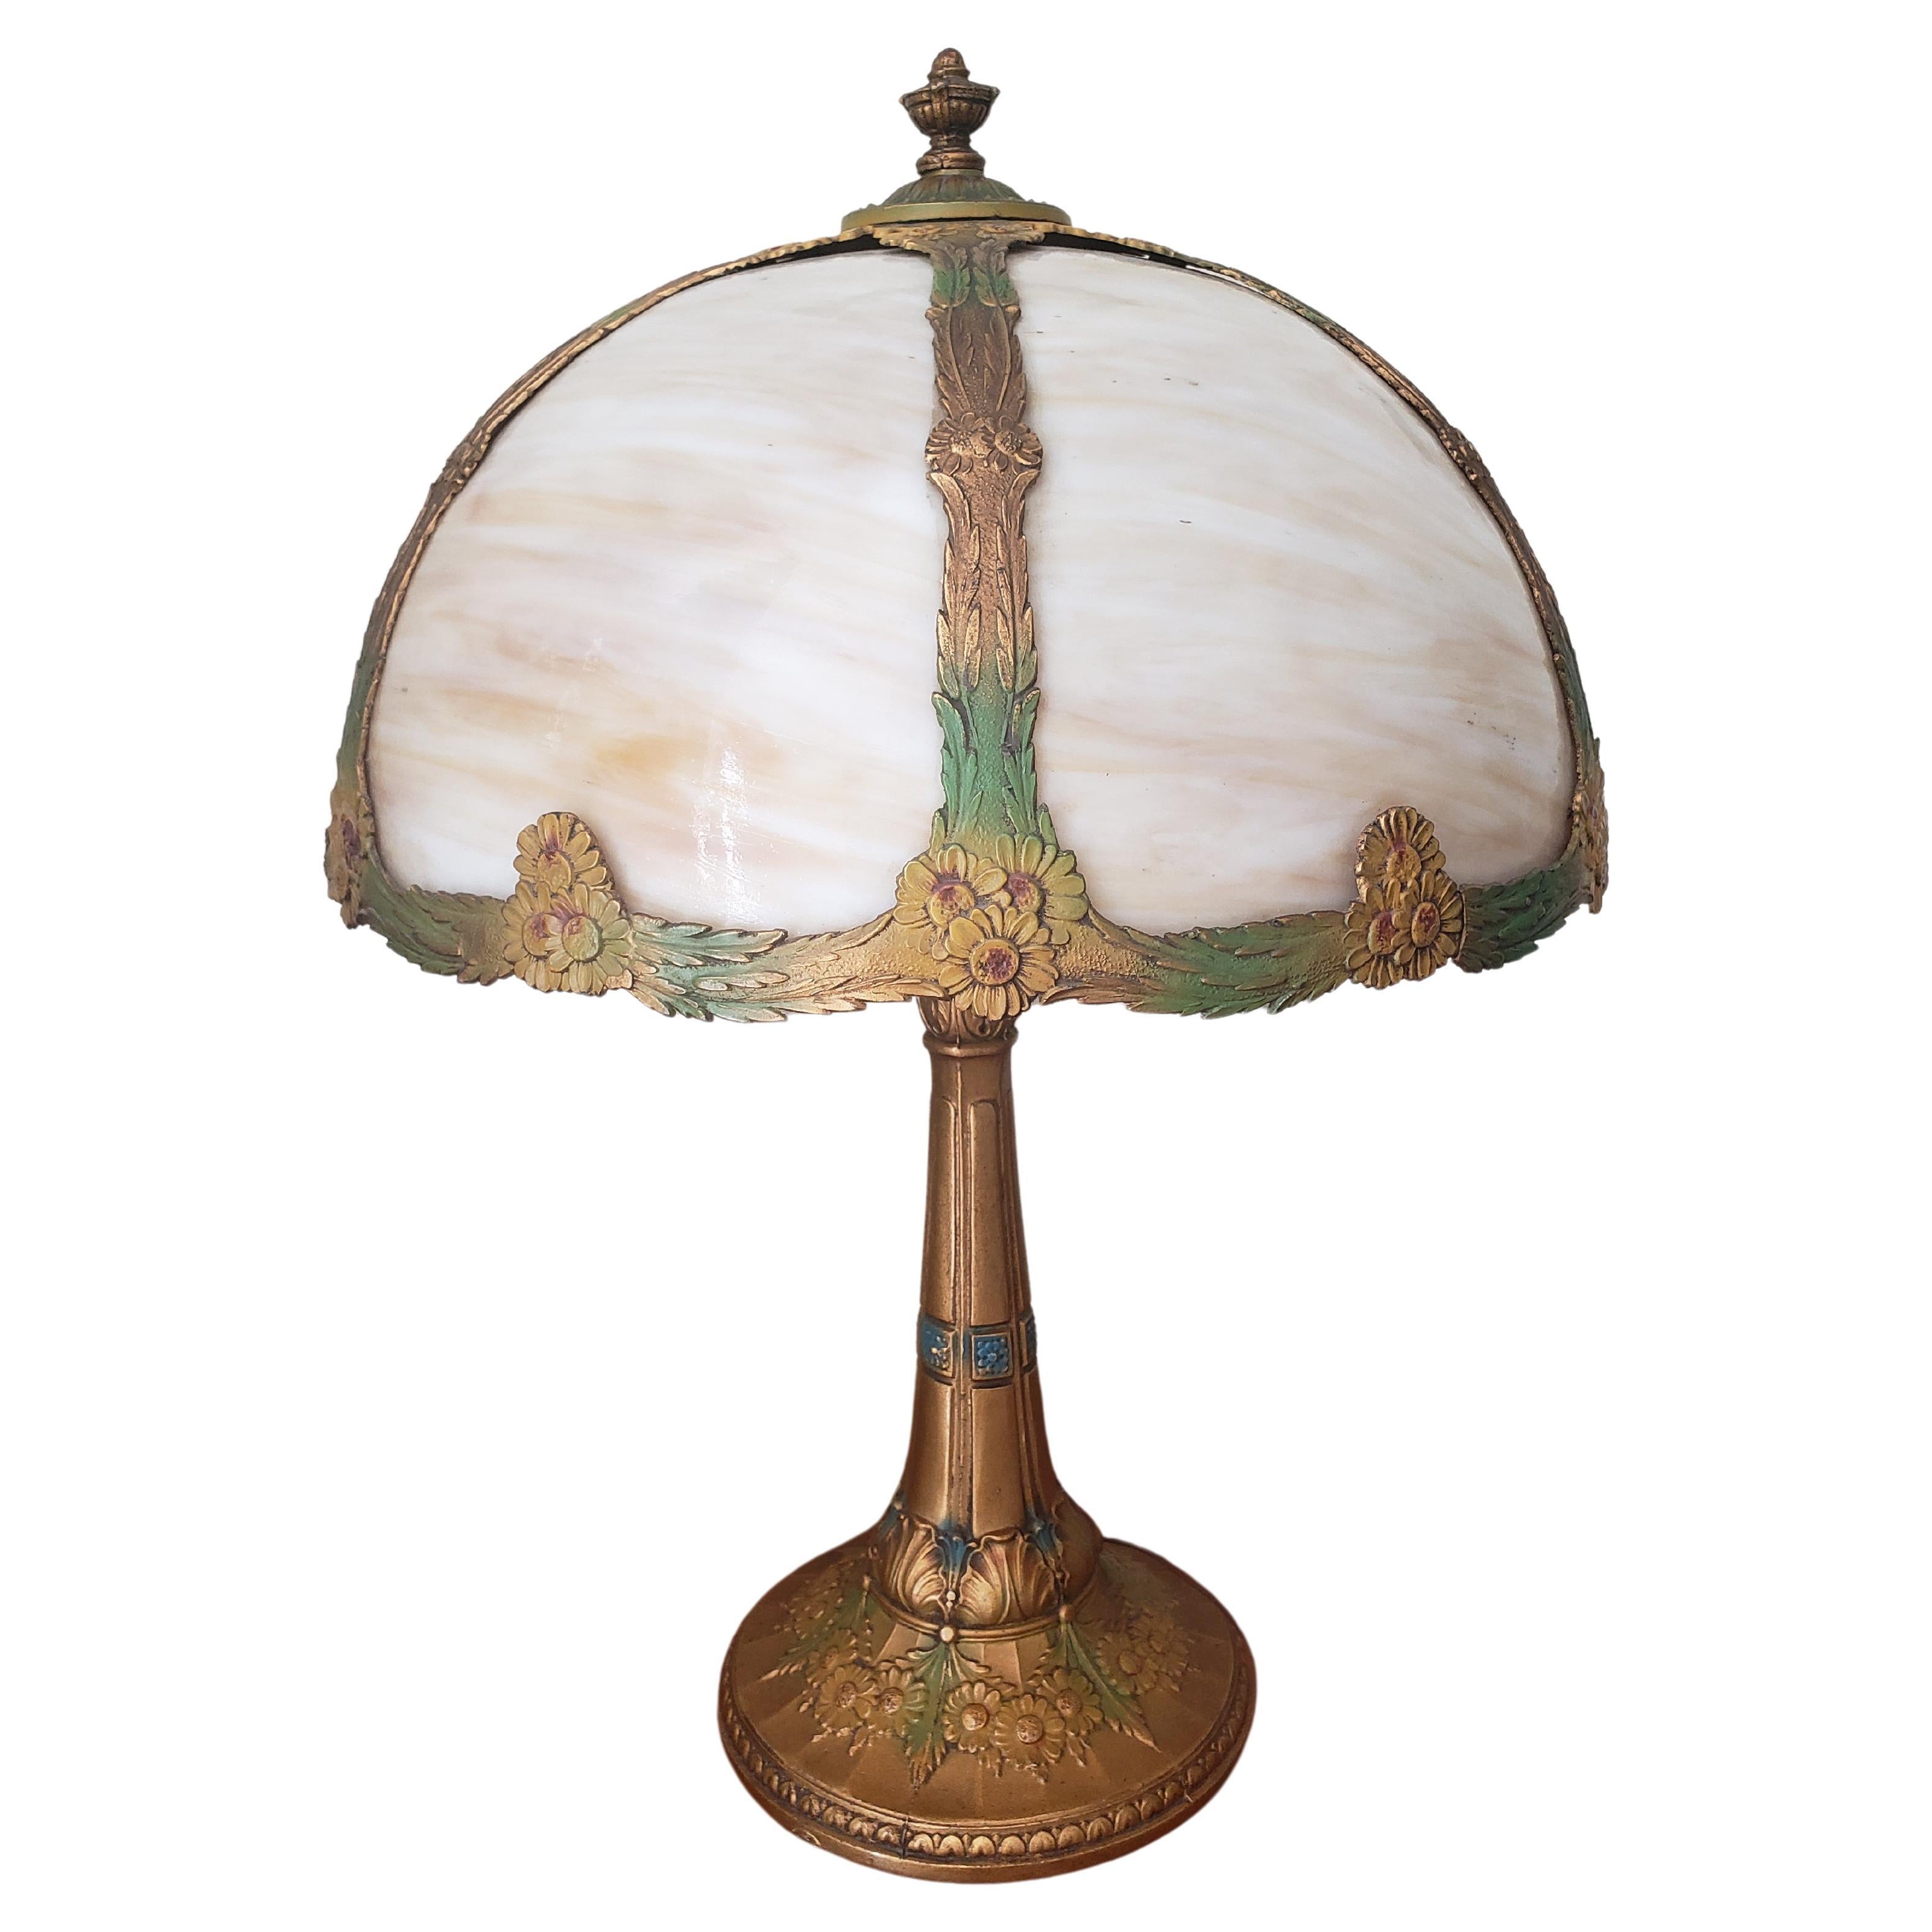 American Arts And Crafts Style Cold Painted Patinated Metal Table Lamp With Caramel Glass Shade, 
Height Overall: 21 In. (53.34 Cm.), Diameter Of Shade: 14 3/4 In. (37.47 Cm.). Very good condition


W6051522
Boxed.



WCHURU051022.